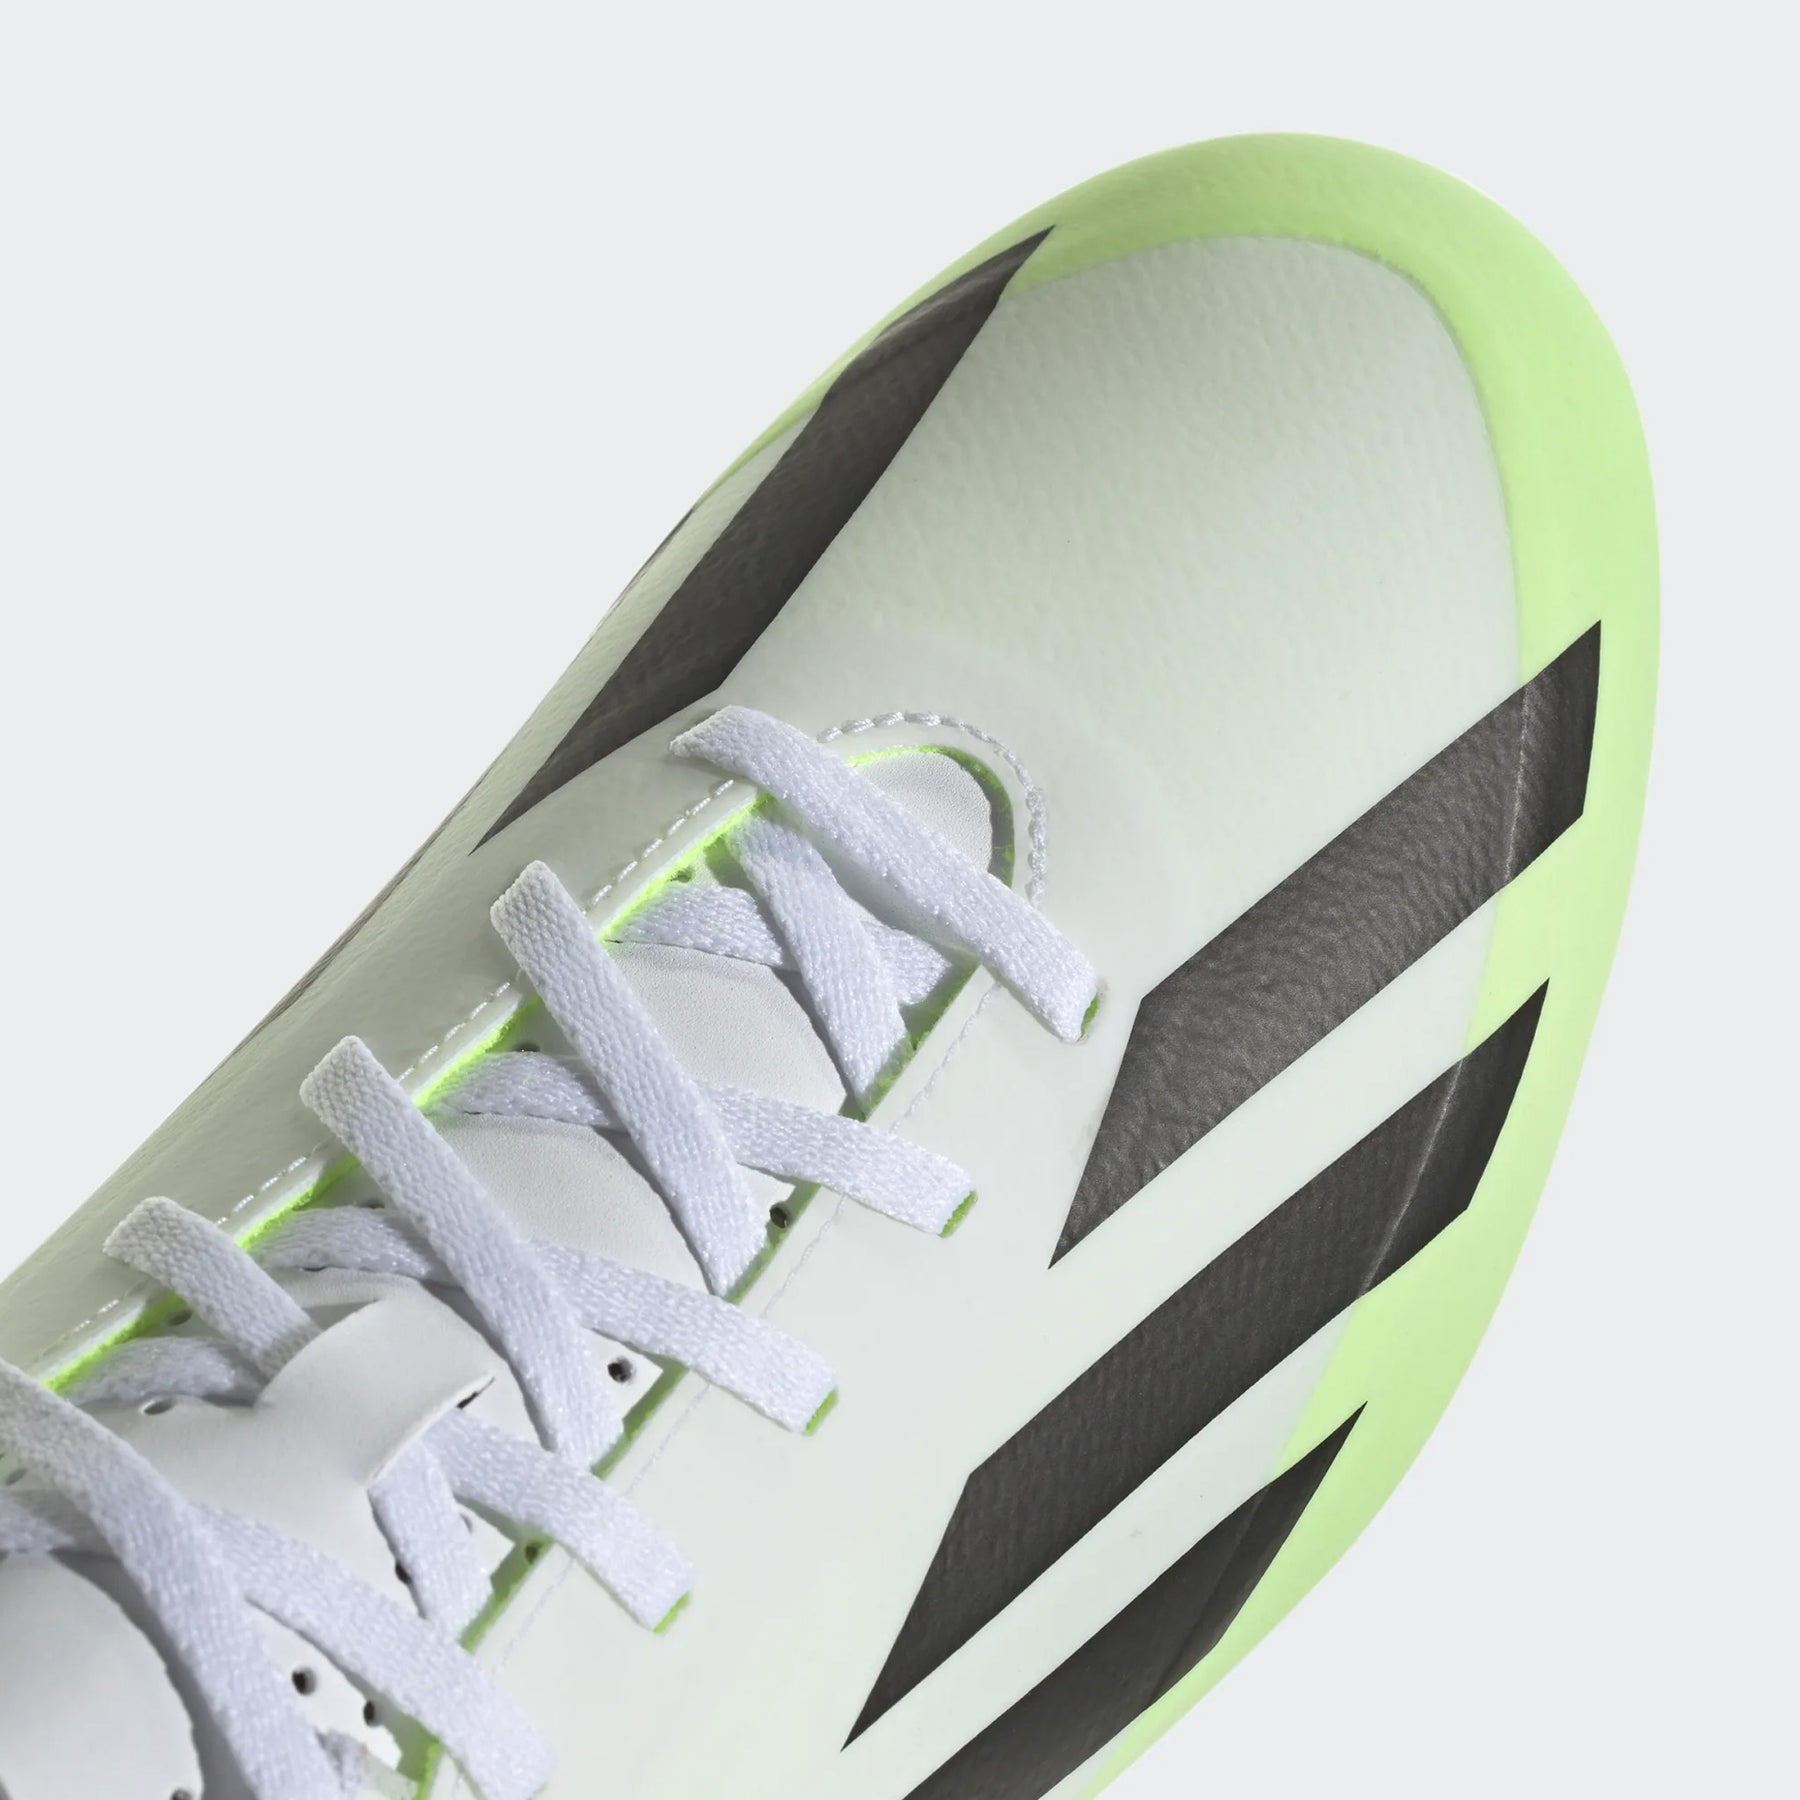 Adidas X Crazy Fast .4 FXG Football Boots: White/Green